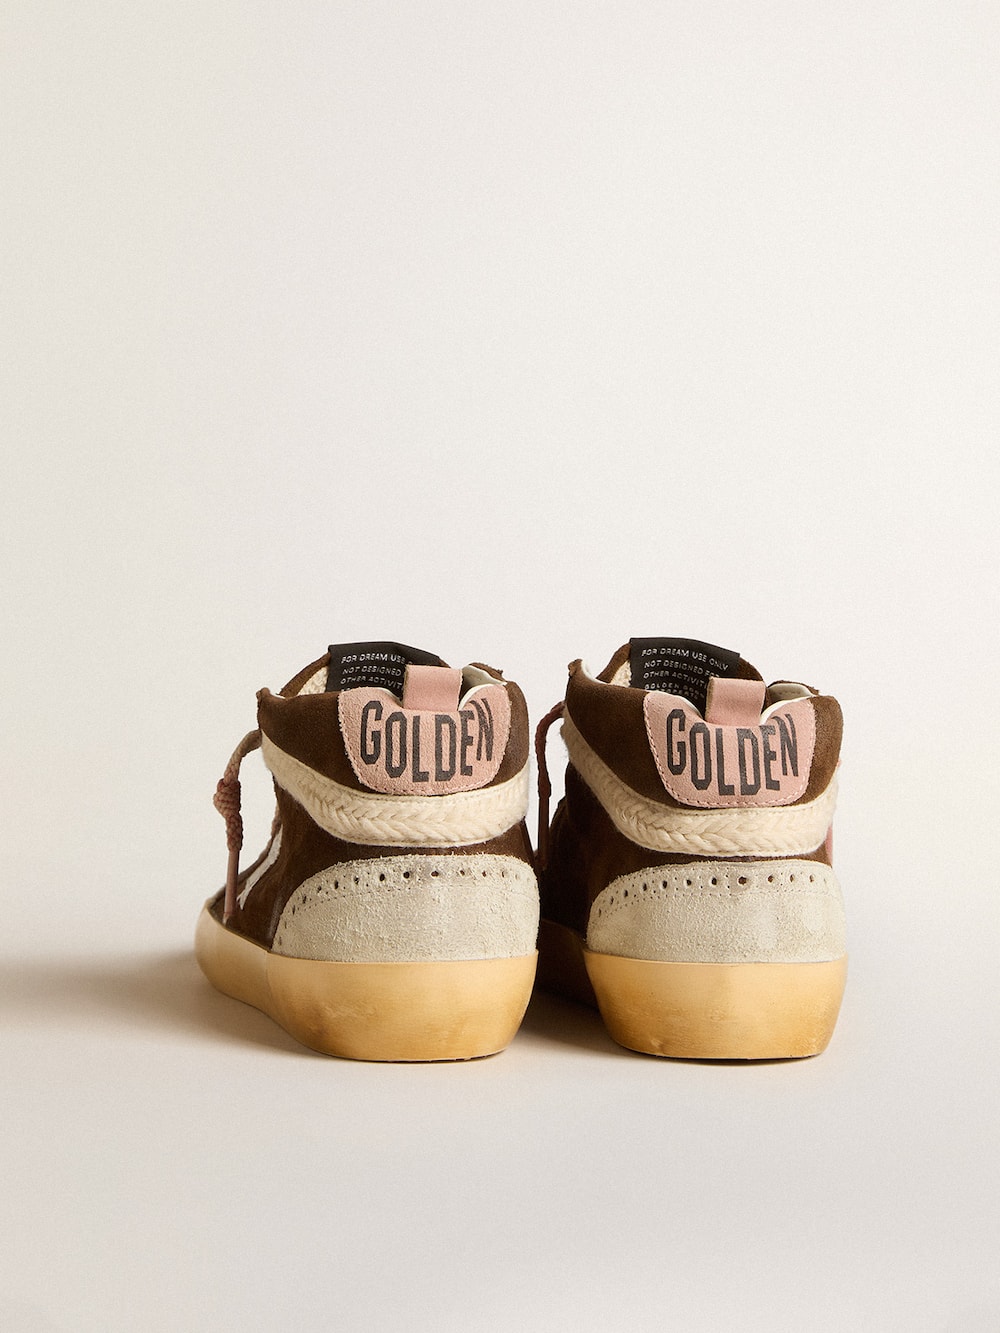 Golden Goose - Mid Star LTD in brown suede with silver nappa leather star and cream flash in 